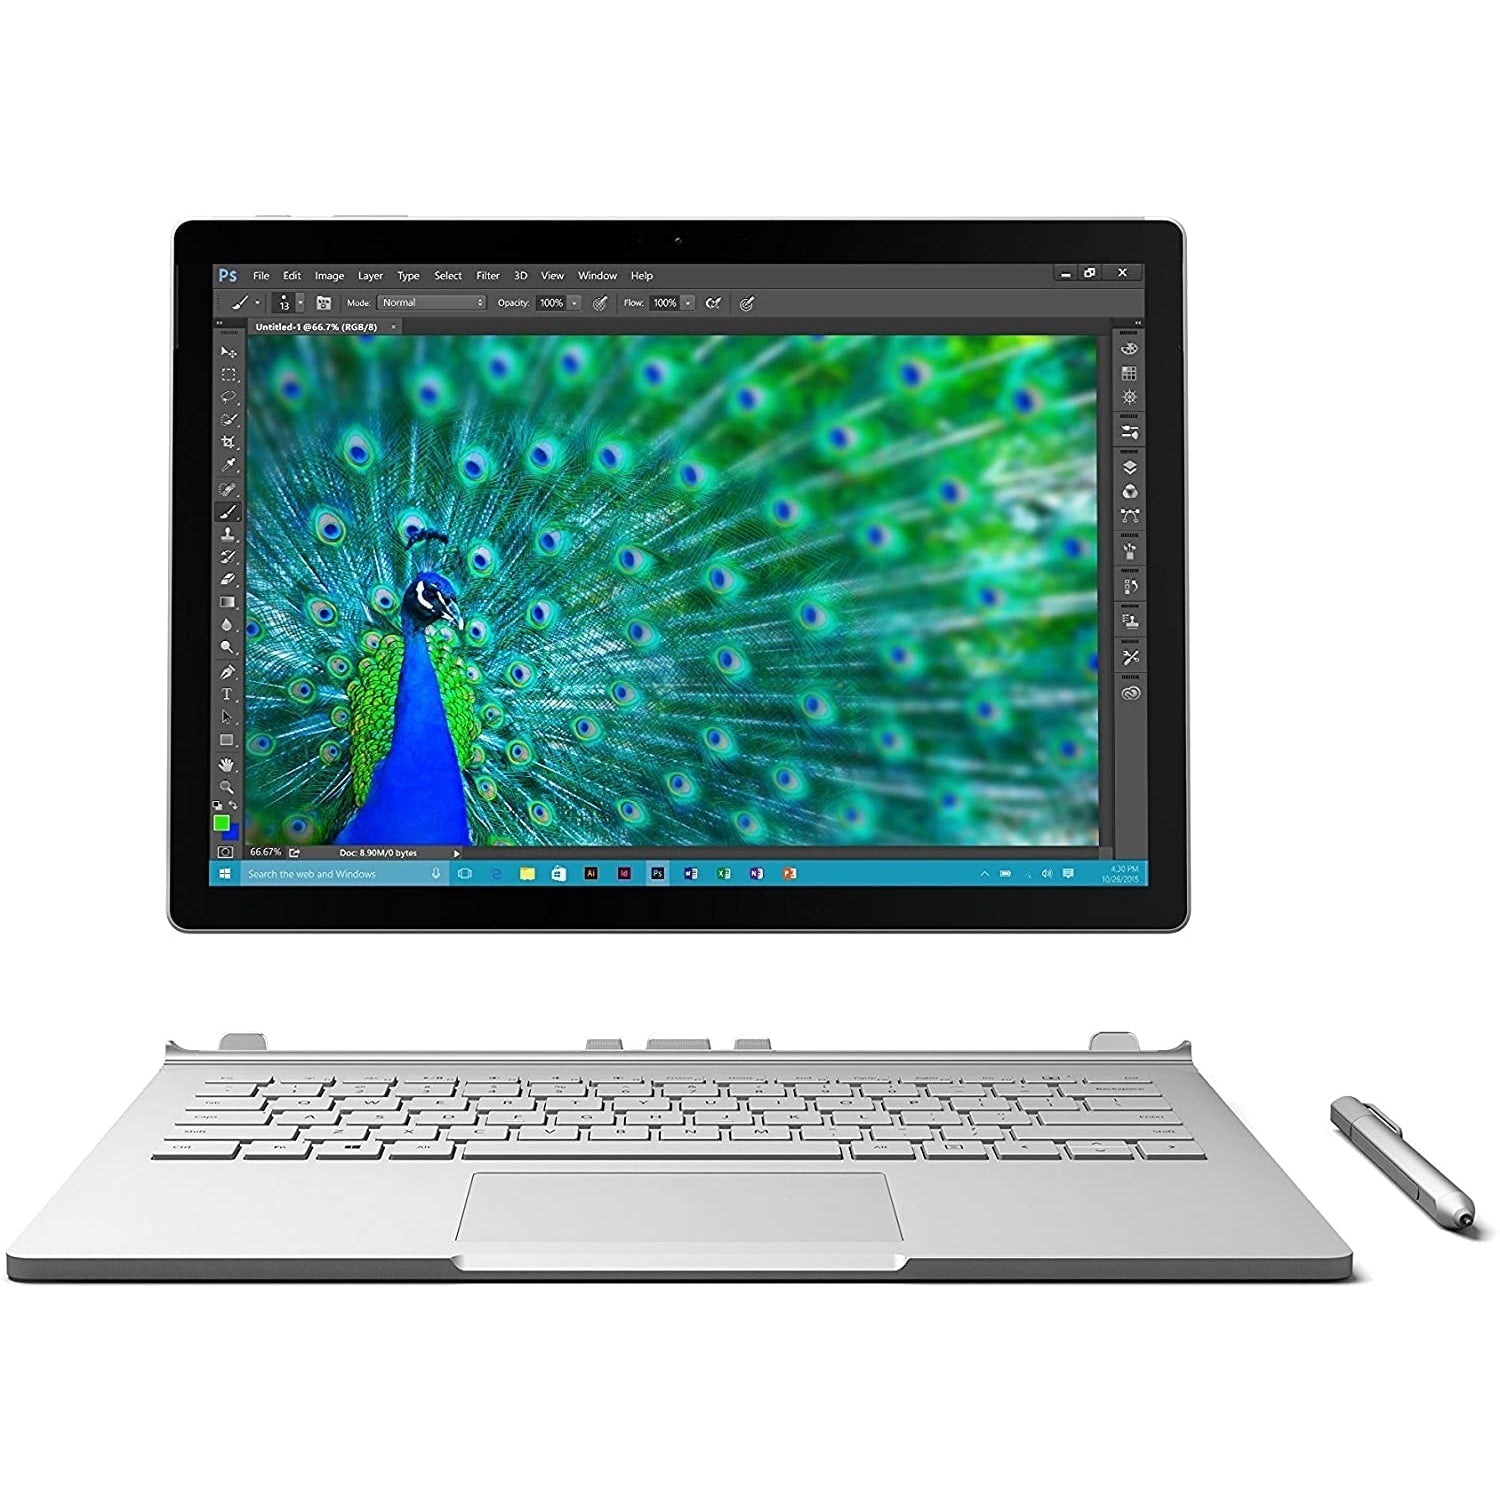 Microsoft Surface Book 13.5" Laptop Intel Core i5 8GB RAM 128GB SSD - Silver - Refurbished Good - No Charger